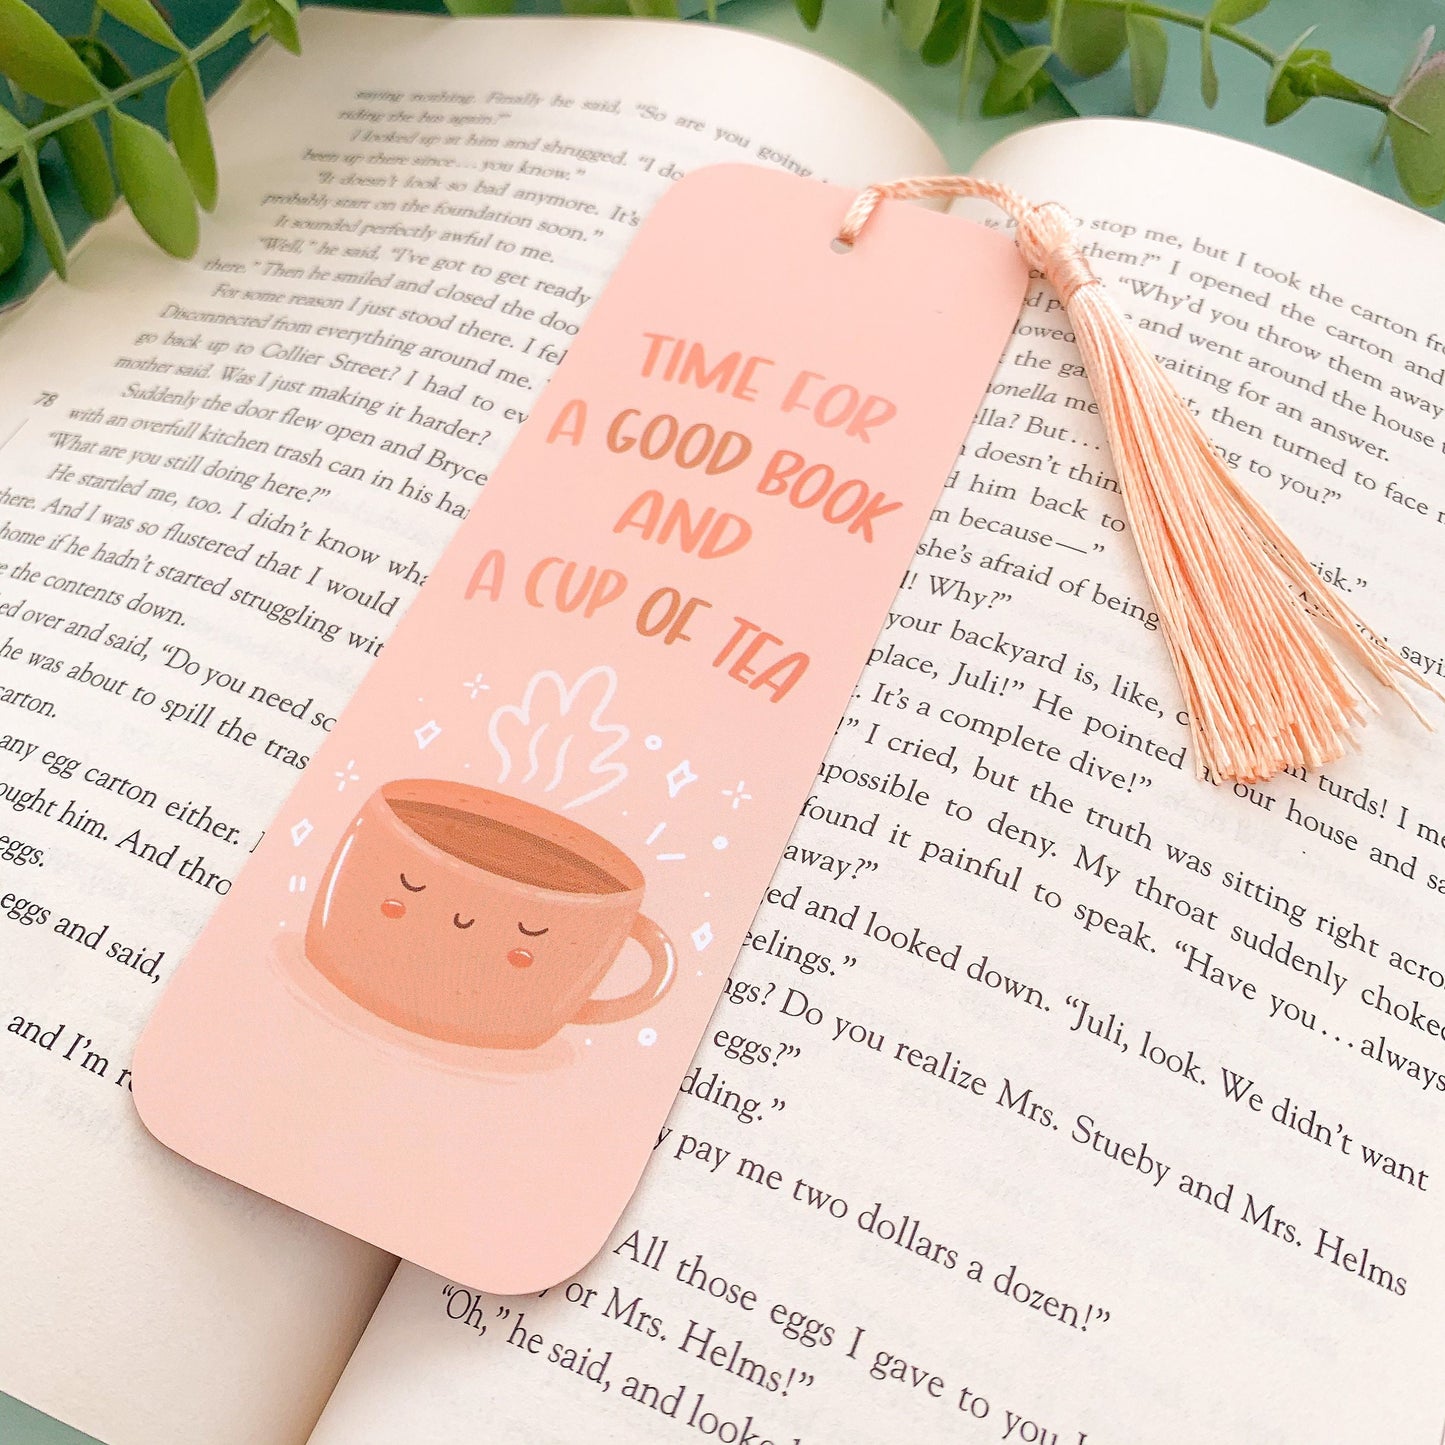 Time for a Good Book and a Cup of Tea Bookmark